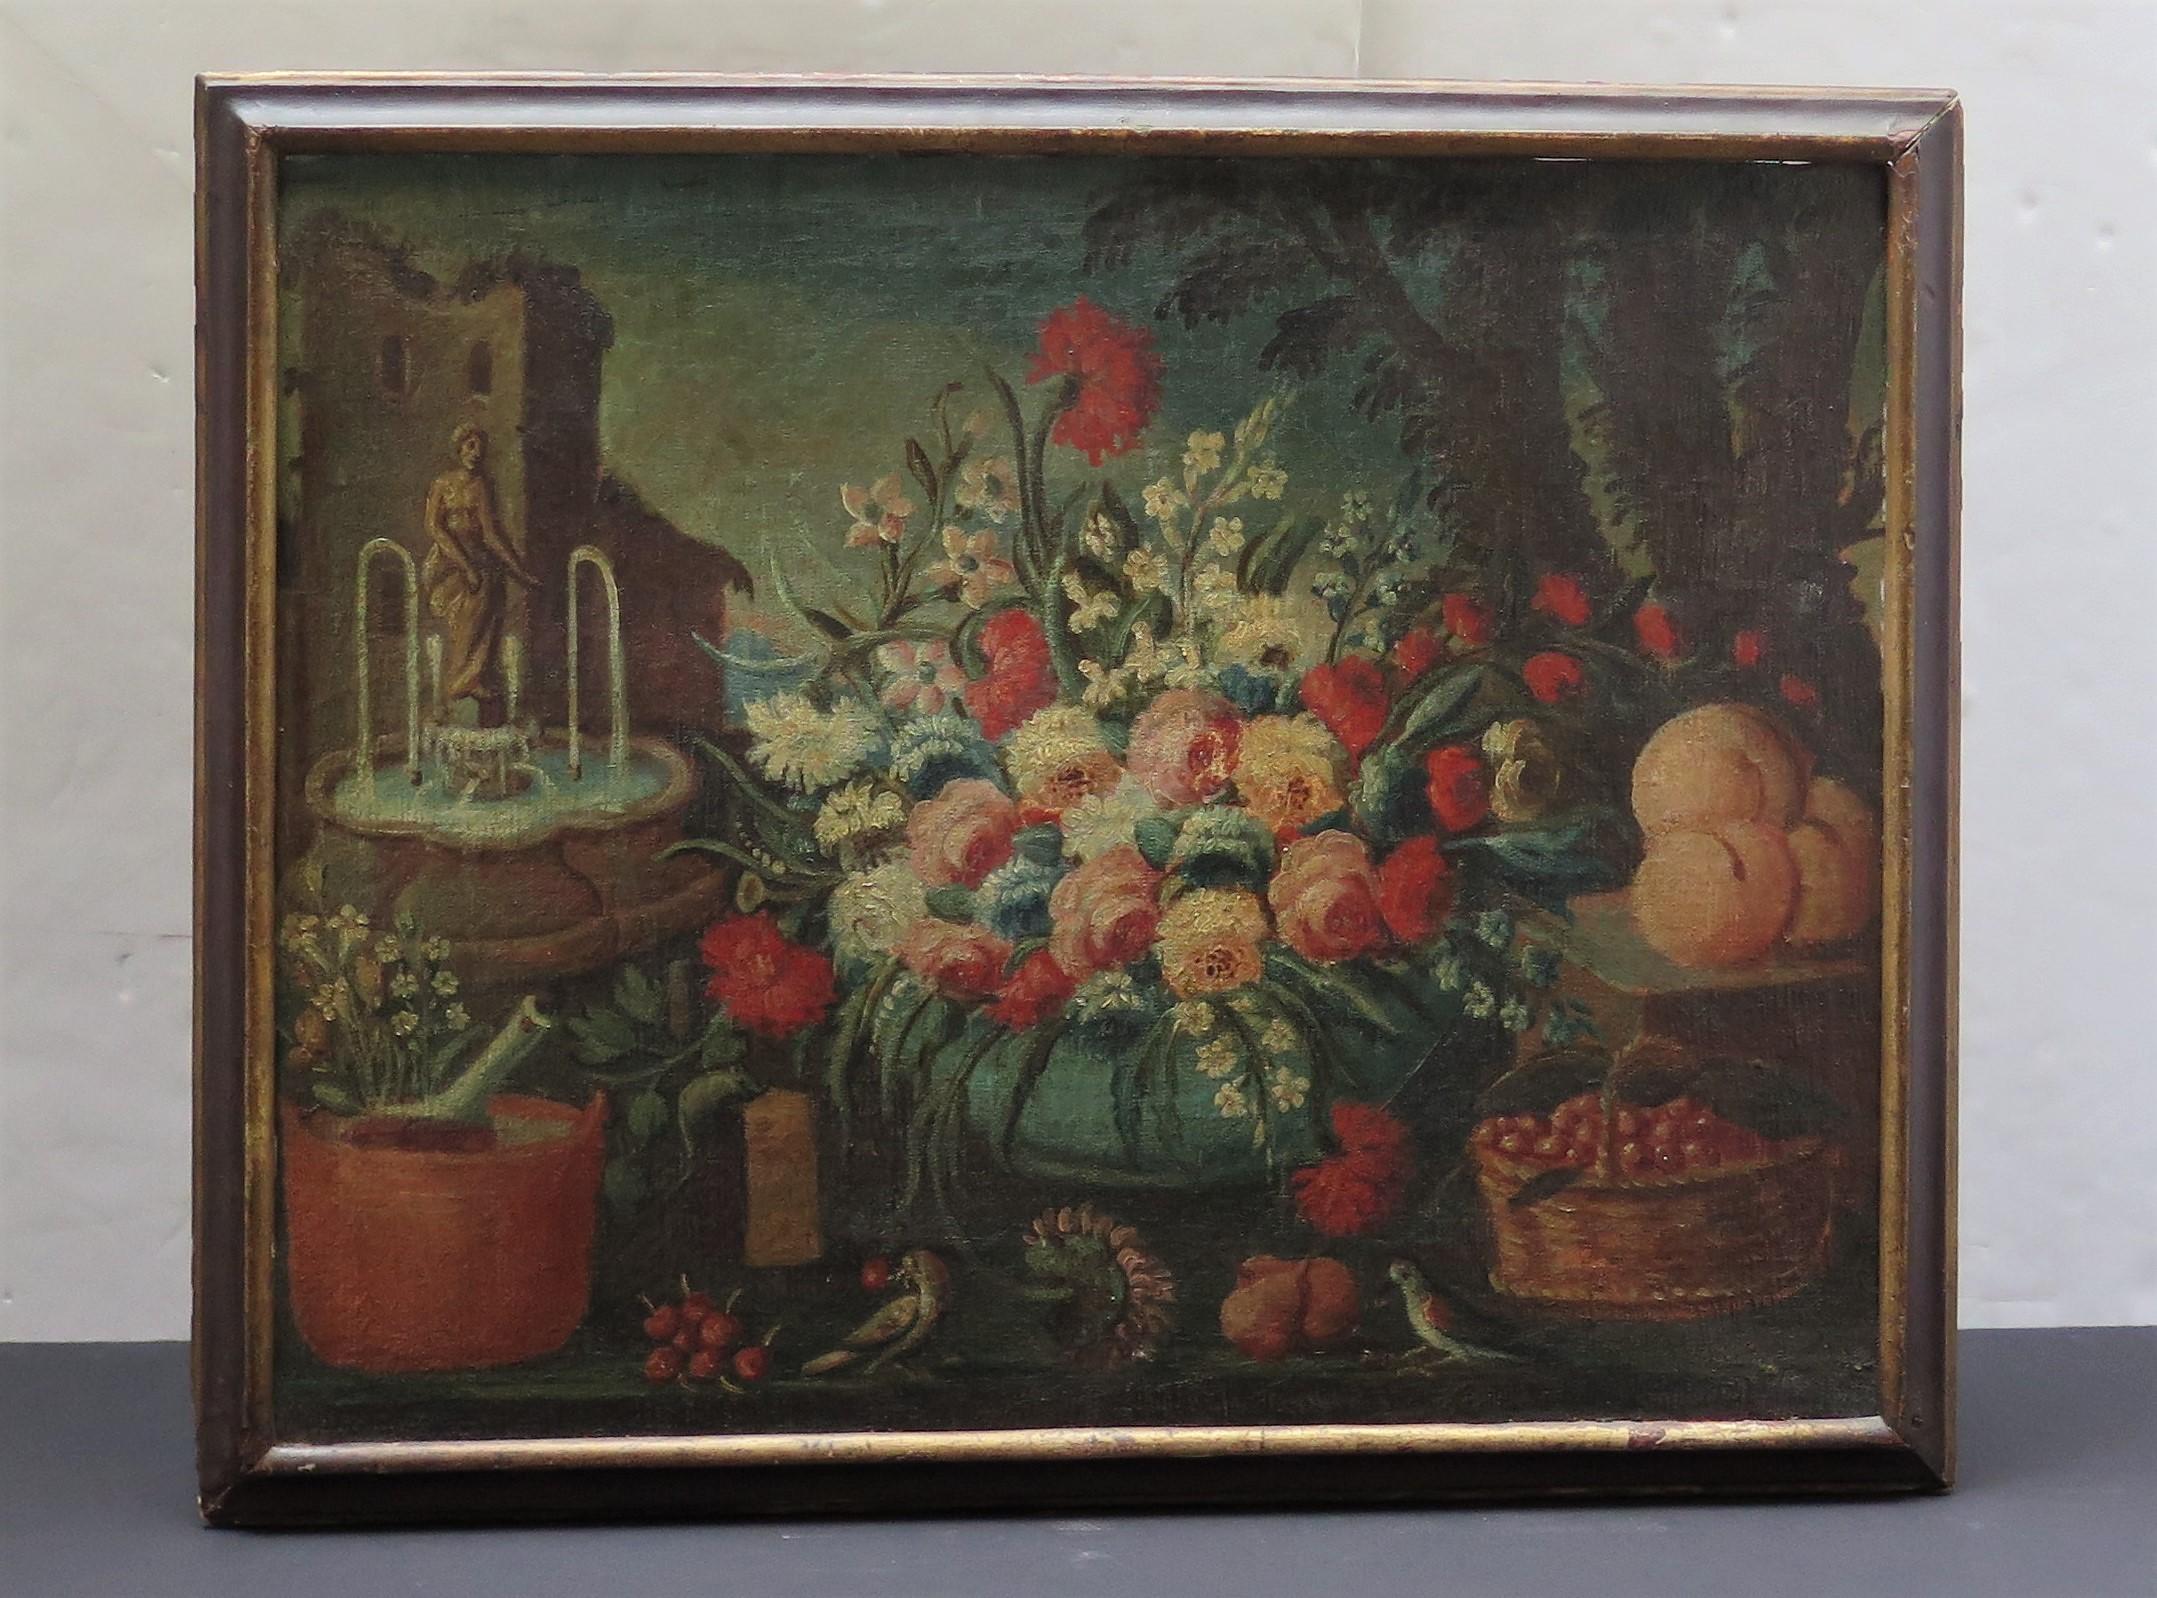 Oil on canvas painting of a floral arrangement with faintains, birds, pears, cherrys and peaches. 
Spanish colonial 18th Century